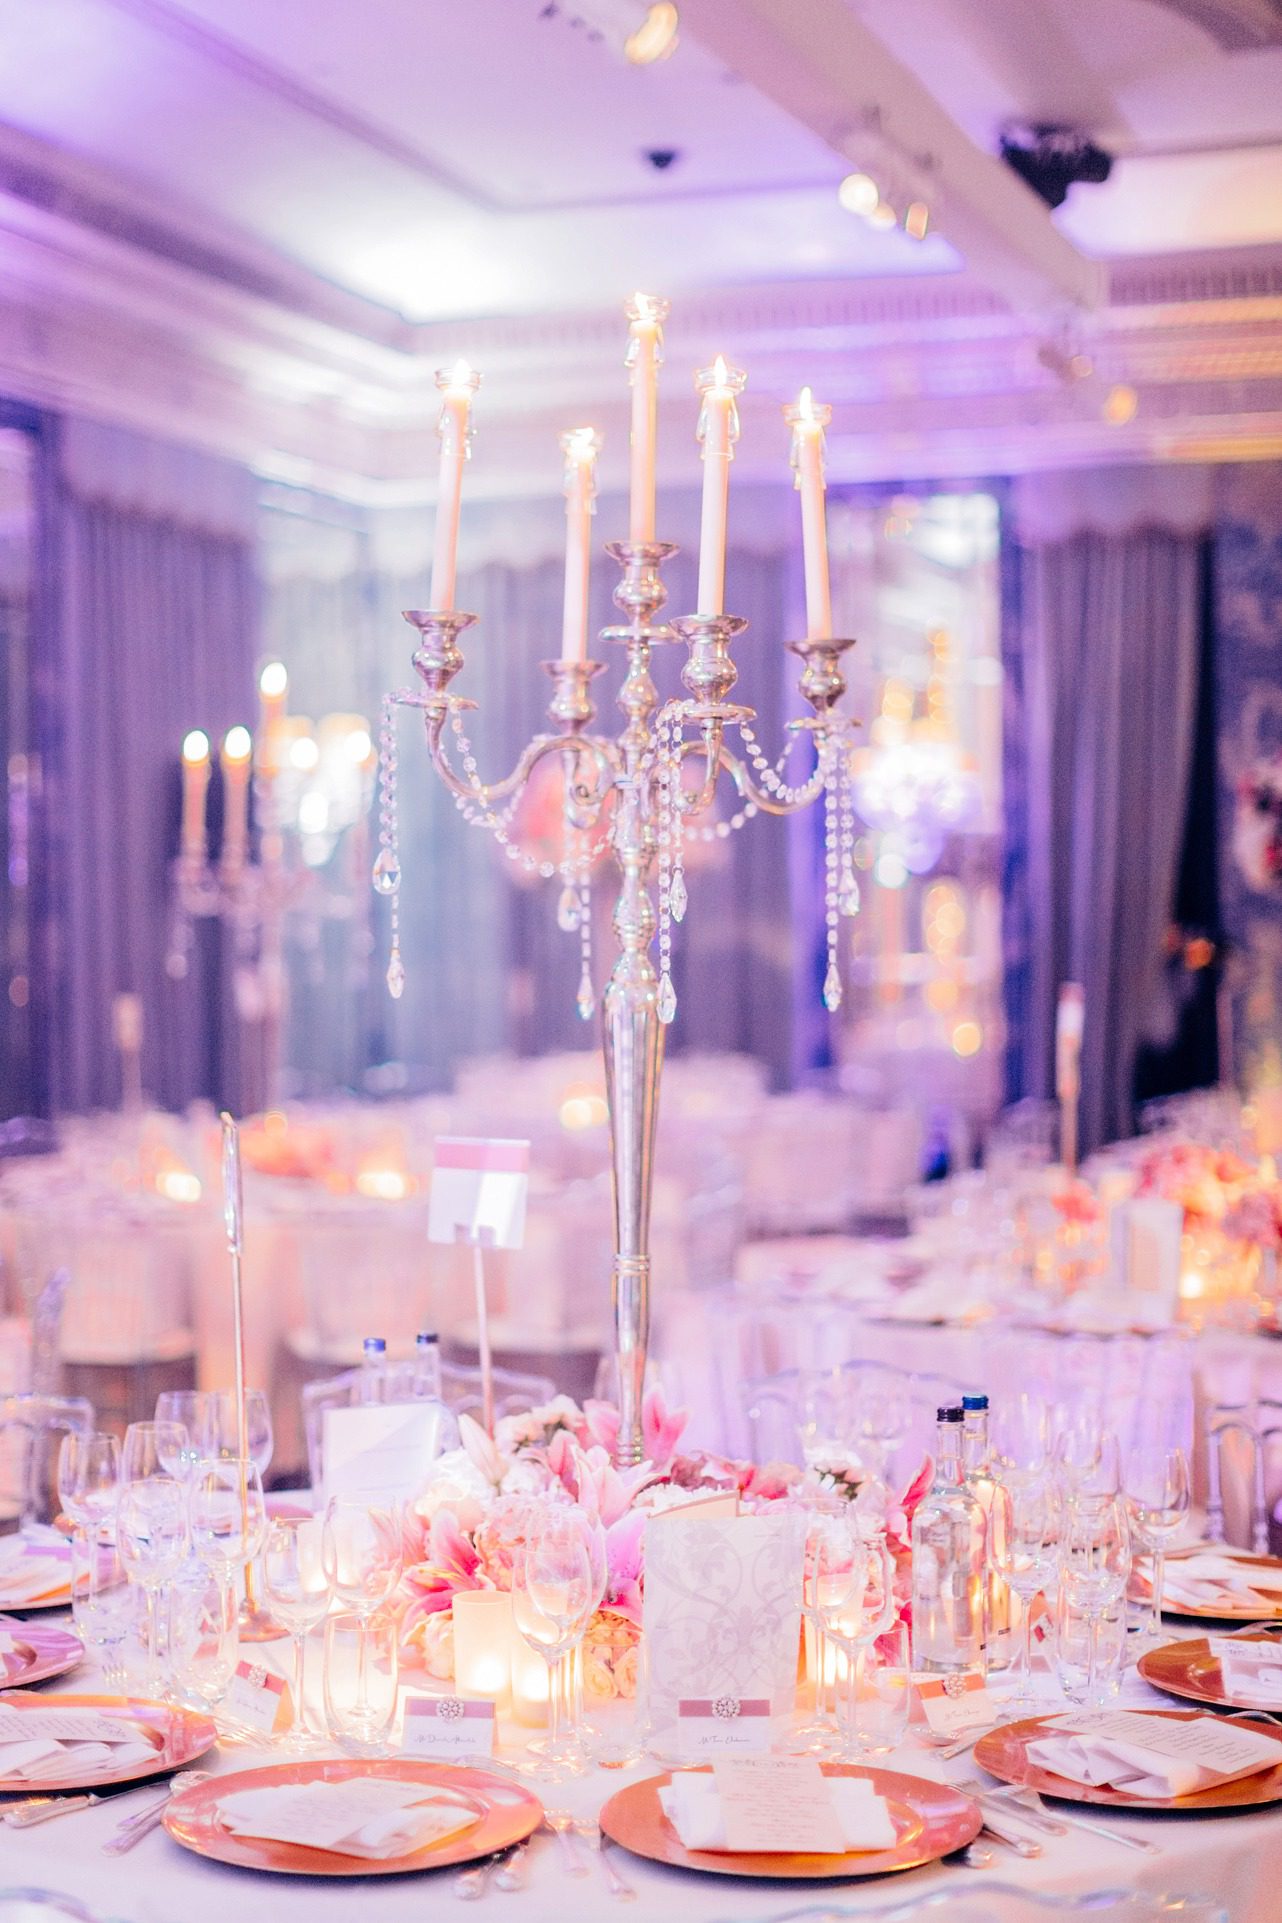 Wedding Candleholder at the Dorchester Hotel in London